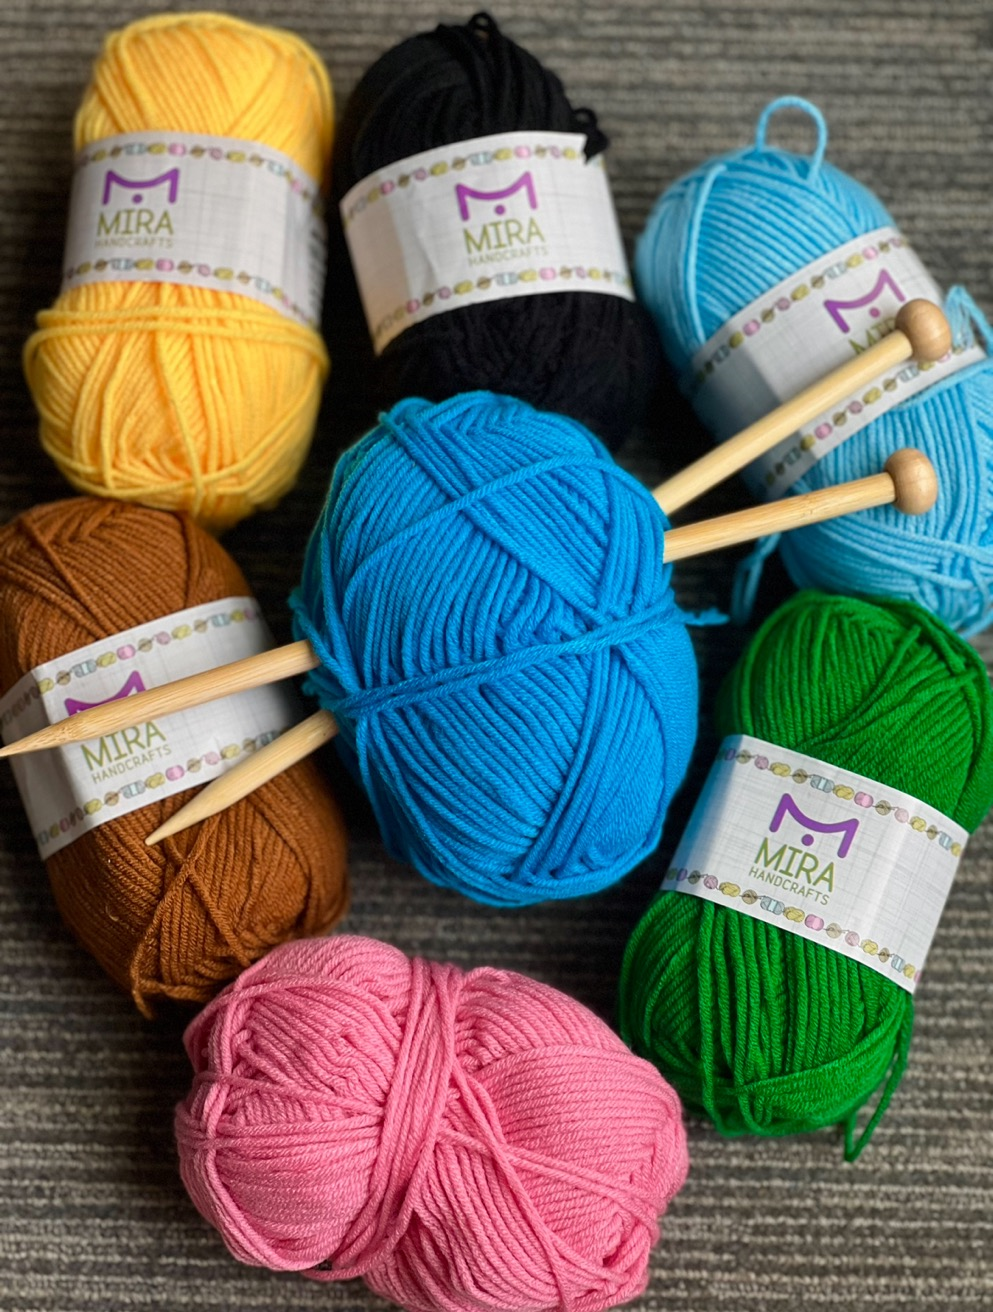 Bundles of colored yarn with the label "Mira Handcrafts" around them. 2 tan knitting needles going through the blue yarn at the center.